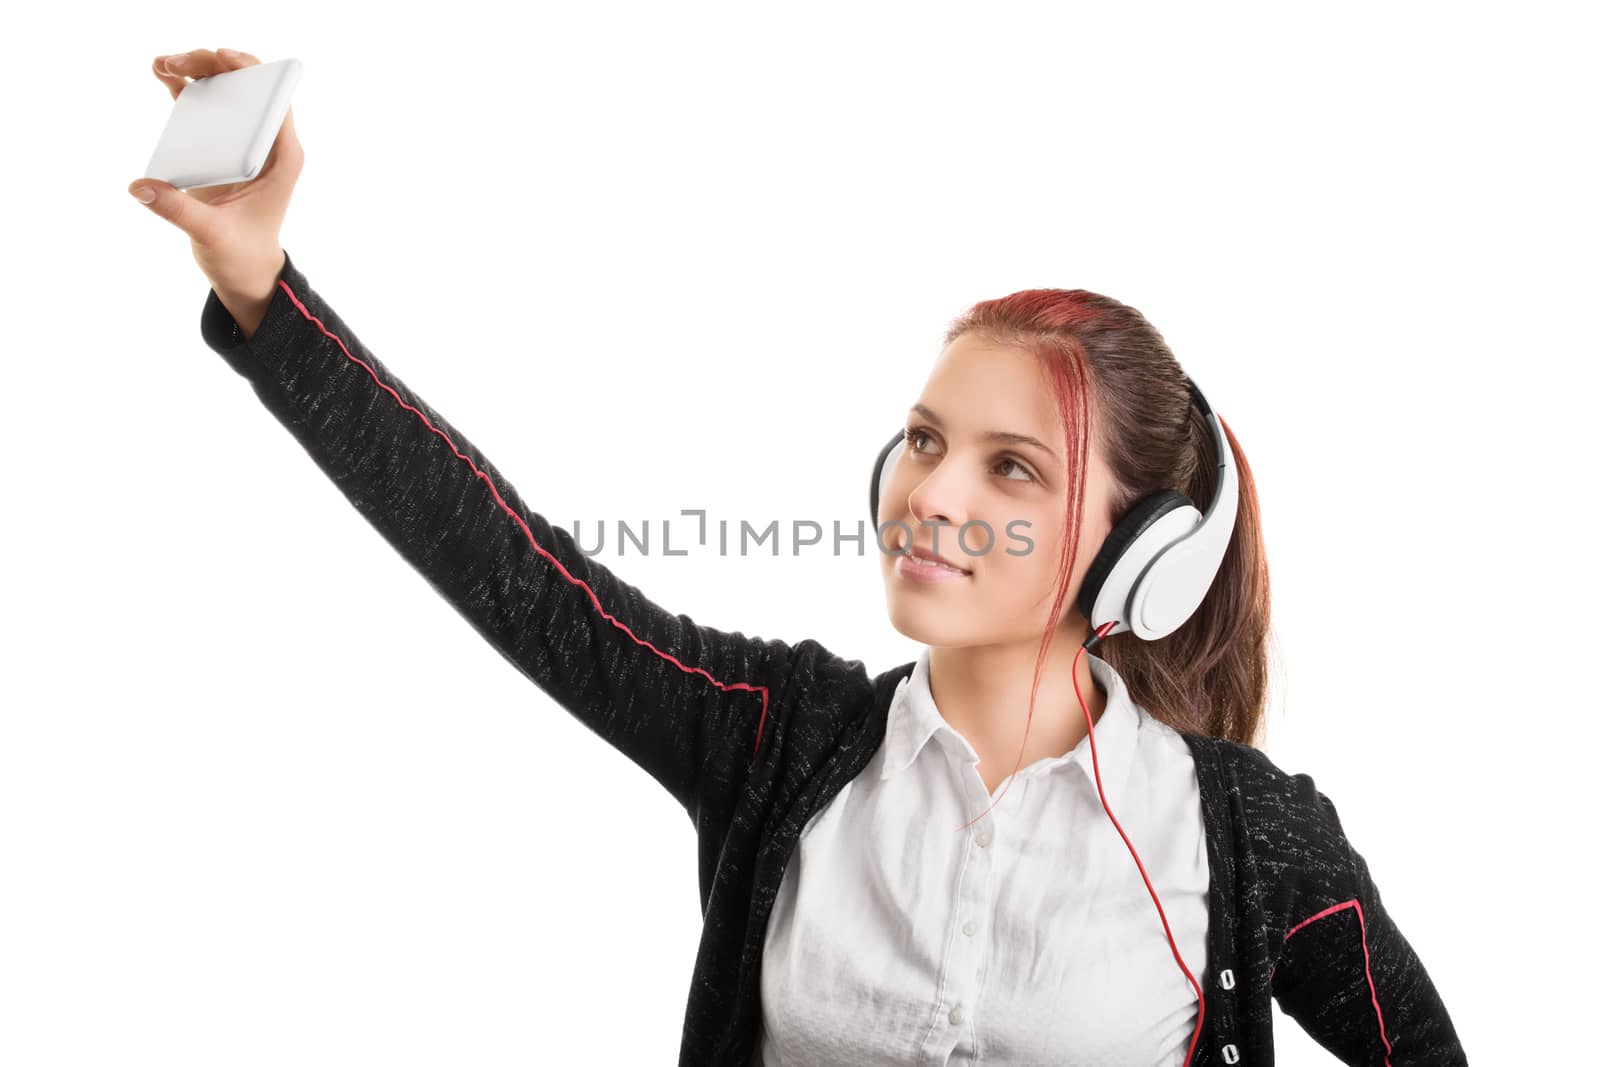 Young girl wearing headphones in a school uniform taking a selfie, isolated on white background.